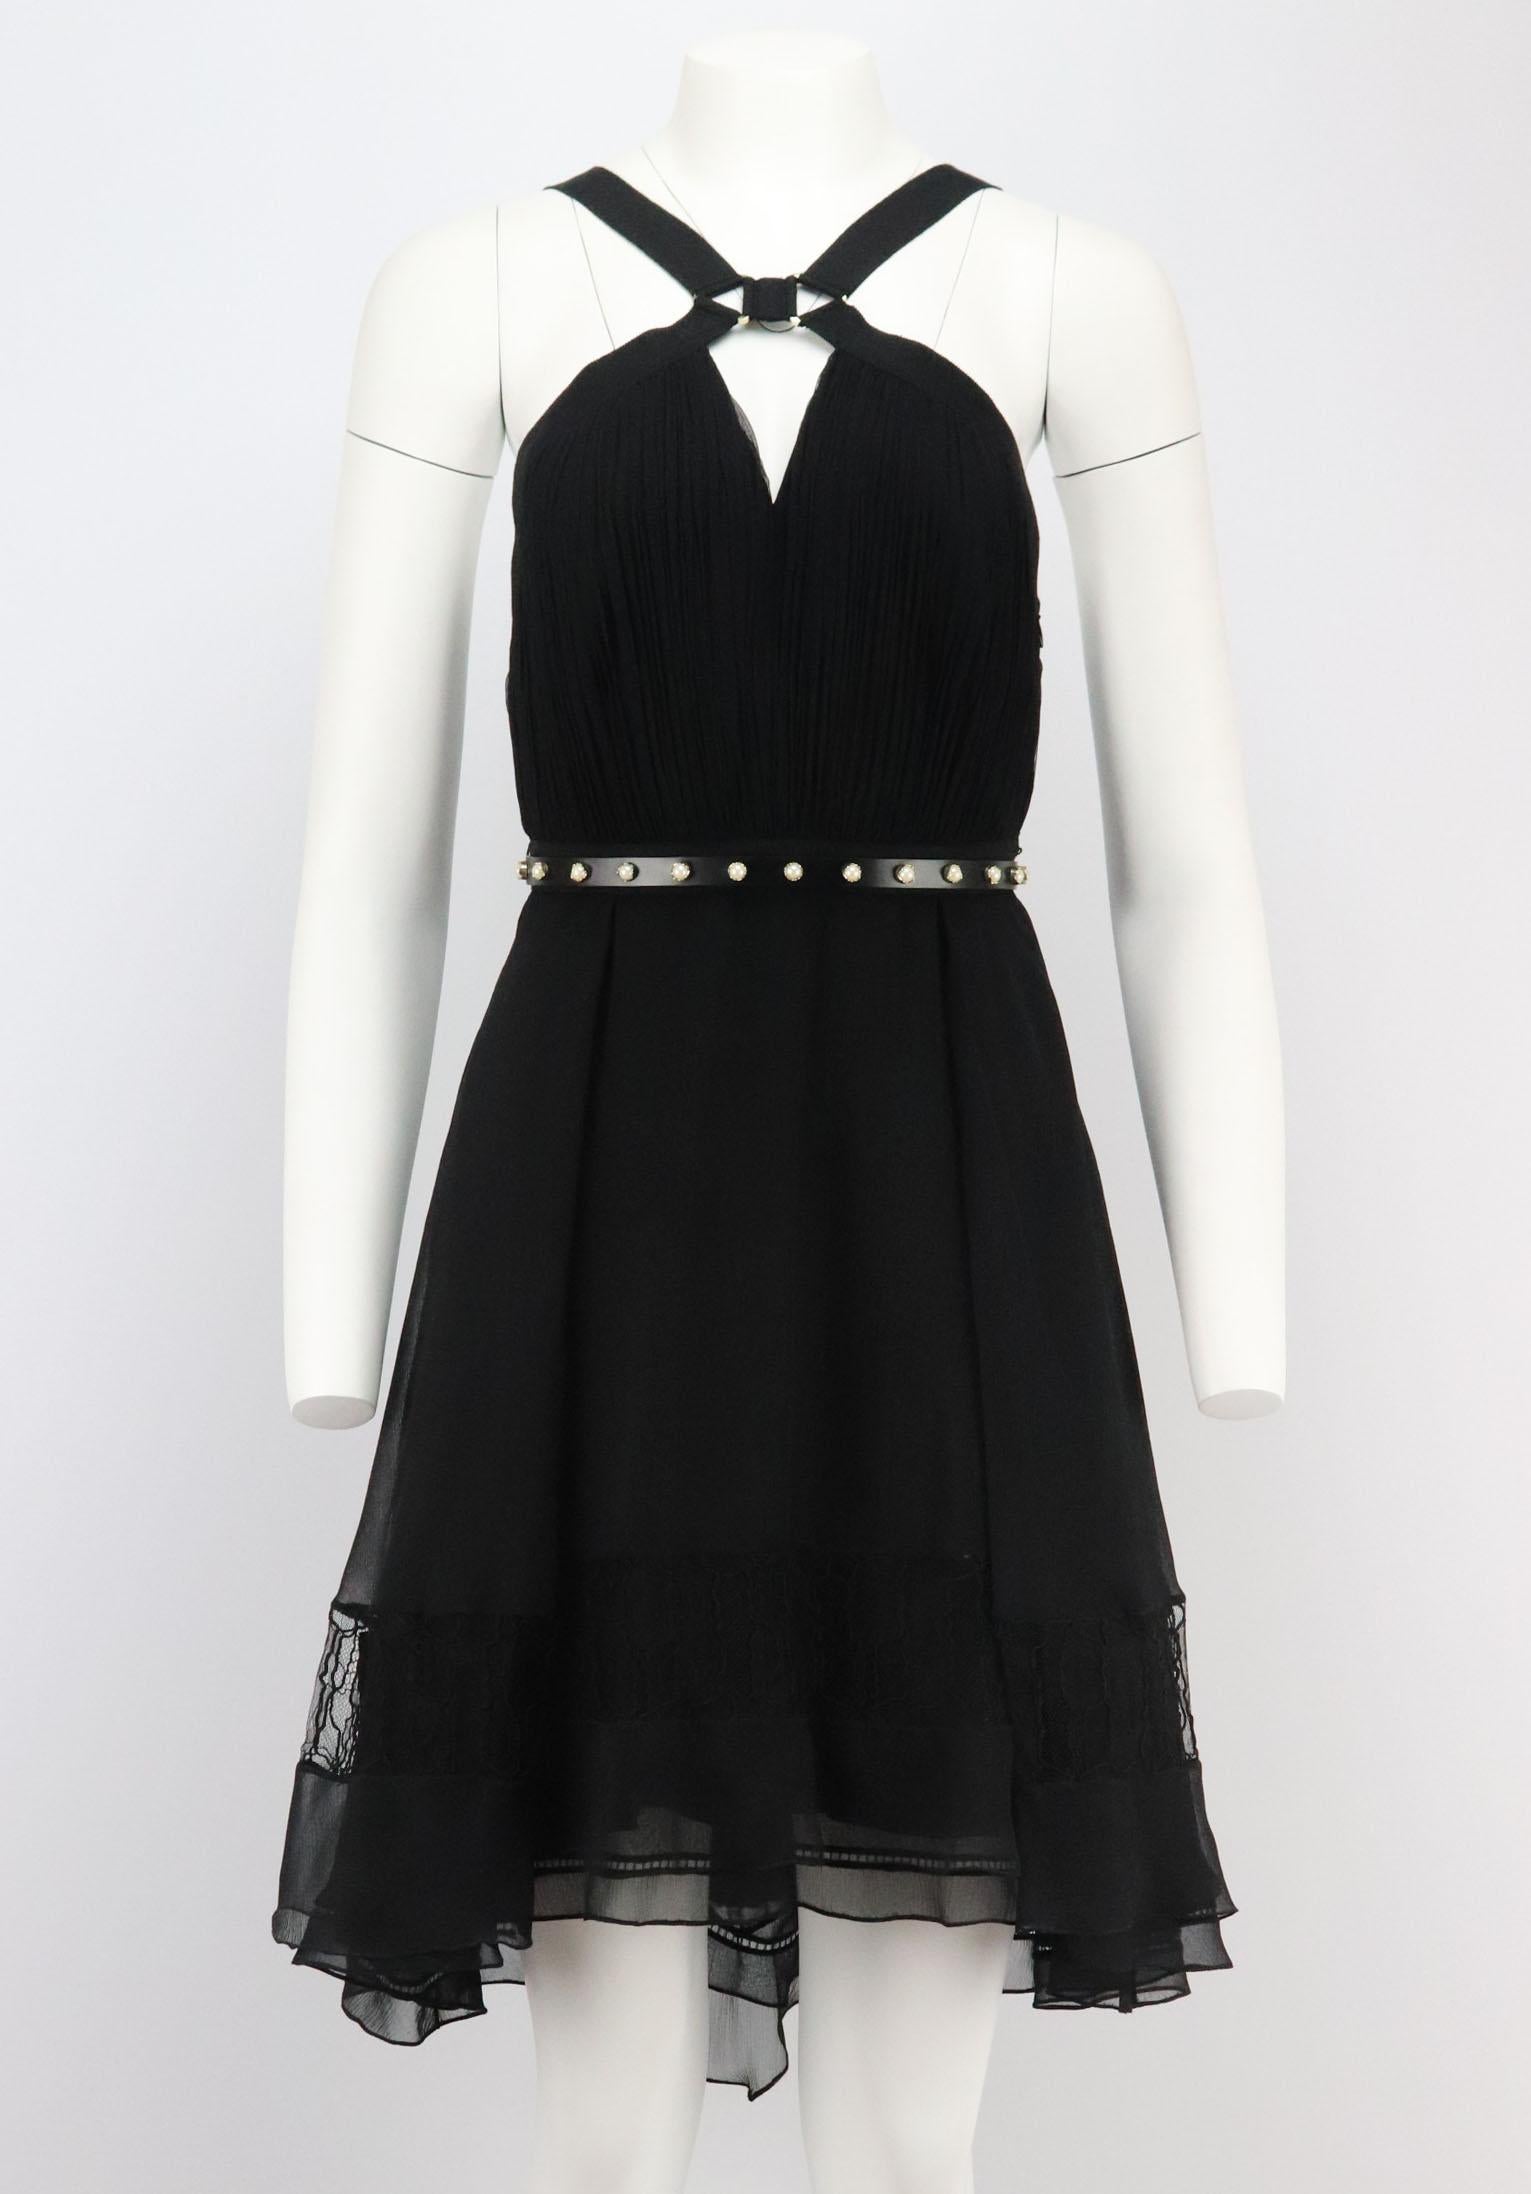 This Jason Wu dress is the perfect blend of elegance and edge-layers of lightweight silk-chiffon spliced with lace are contrasted with an edgy harness-inspired neckline and wide adjustable straps.
Black semi-sheer silk-chiffon.
Zip and hook